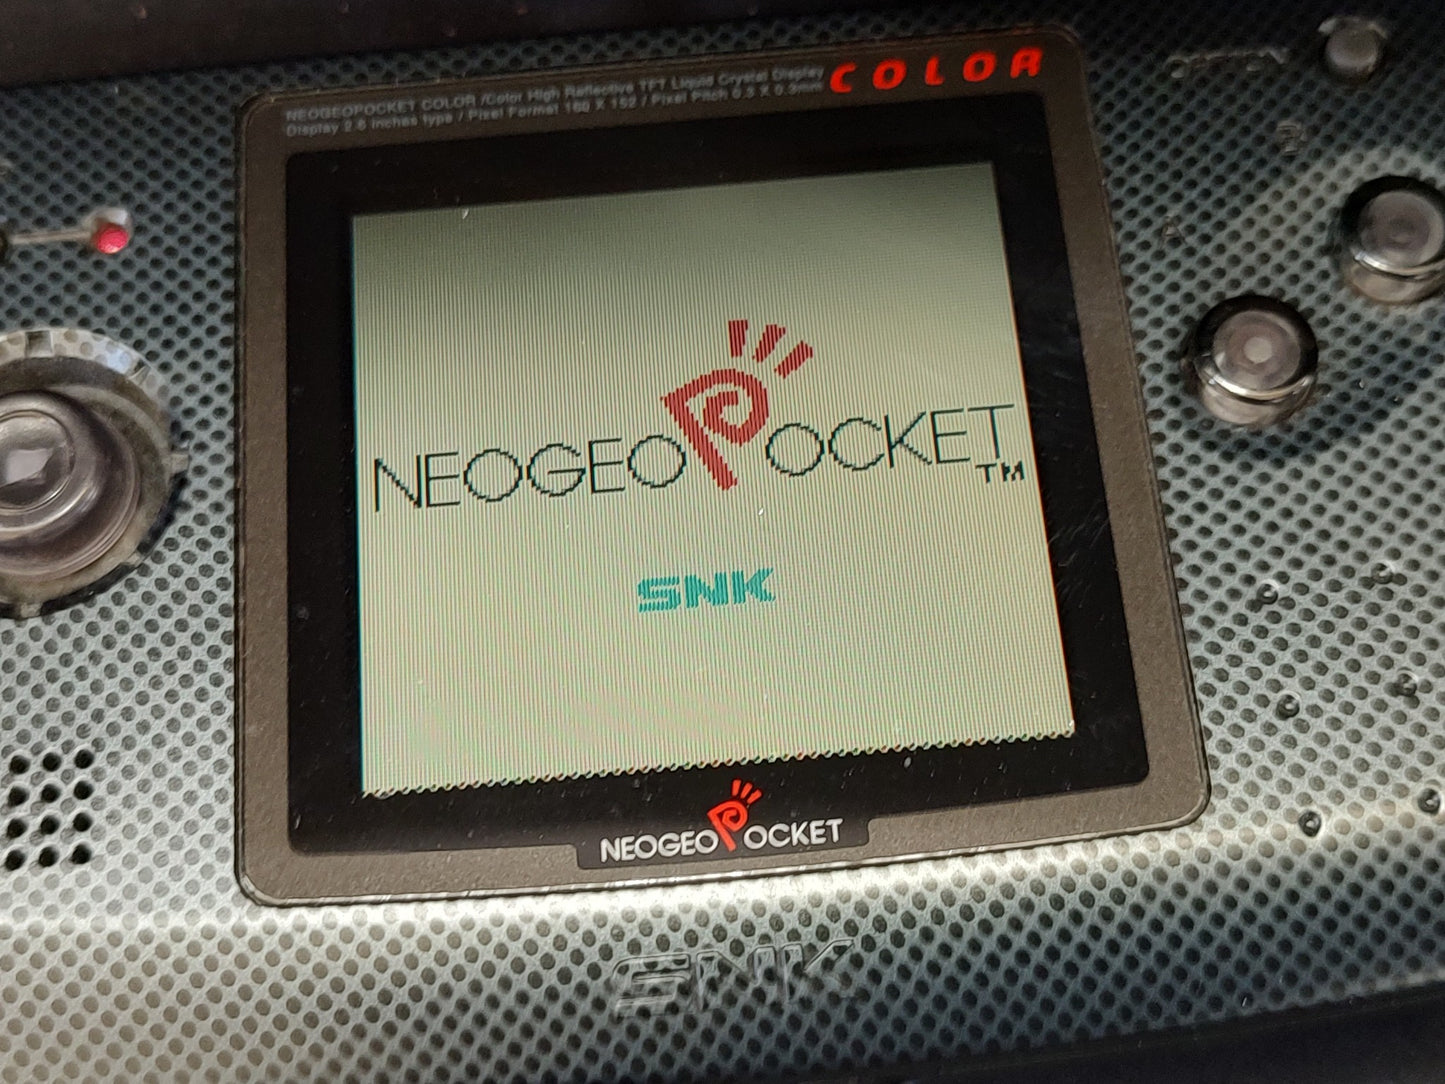 SNK NEOGEO POCKET Color Carbon Black Console and box set, Working-f1124-